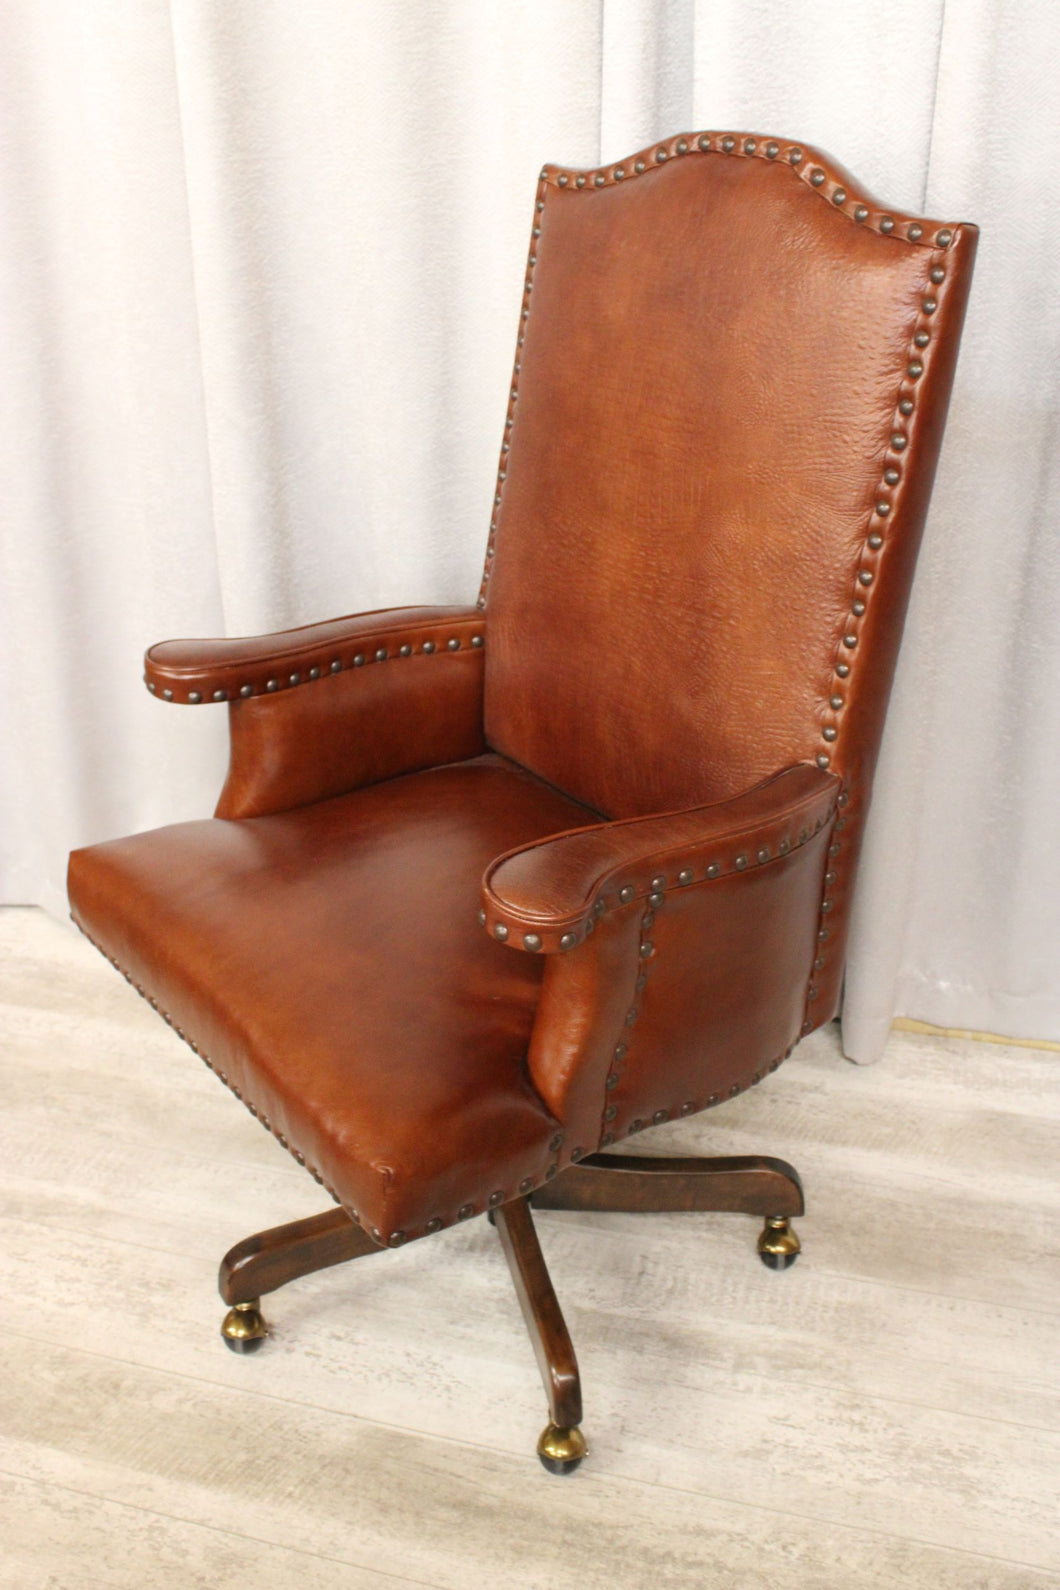 Sorrel Executive Chair with Croc Leather